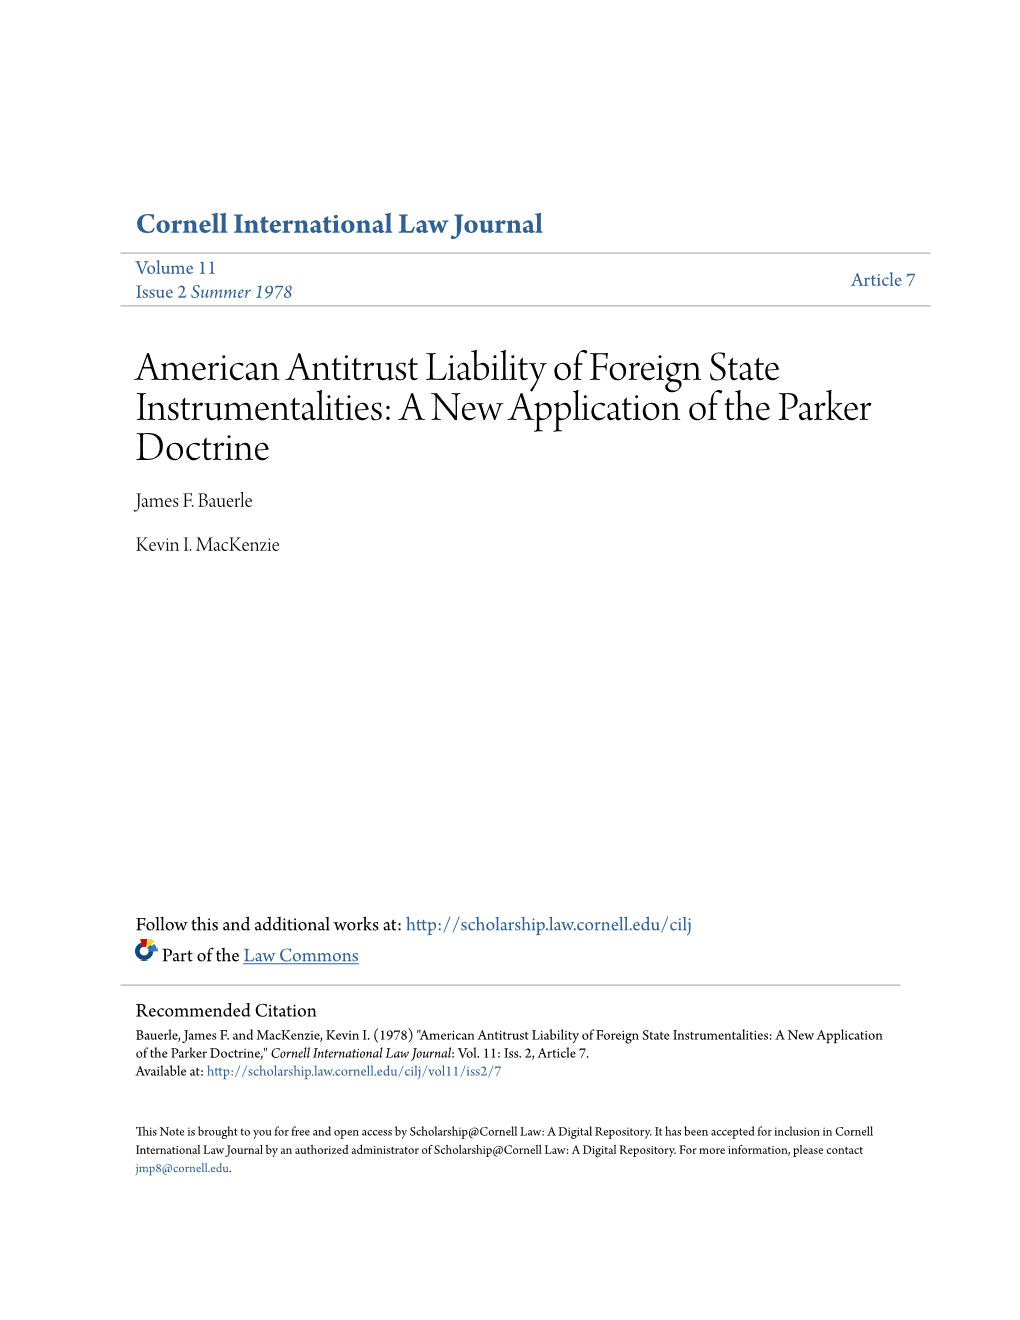 American Antitrust Liability of Foreign State Instrumentalities: a New Application of the Parker Doctrine James F